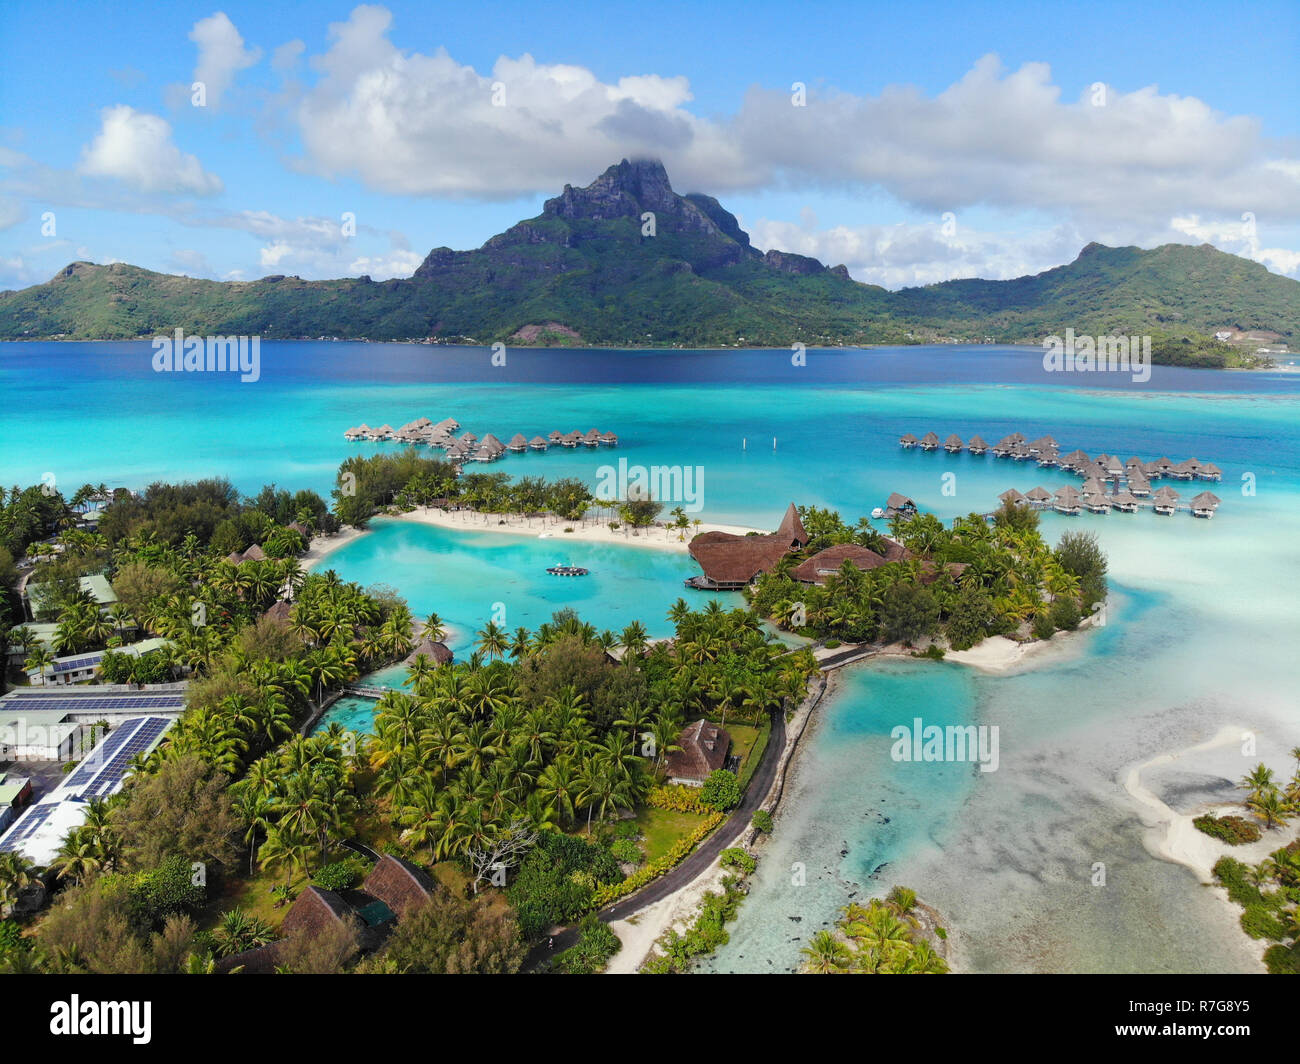 Aerial panoramic landscape view of the island of Bora Bora in French Polynesia with the Mont Otemanu mountain surrounded by a turquoise lagoon, motu a Stock Photo